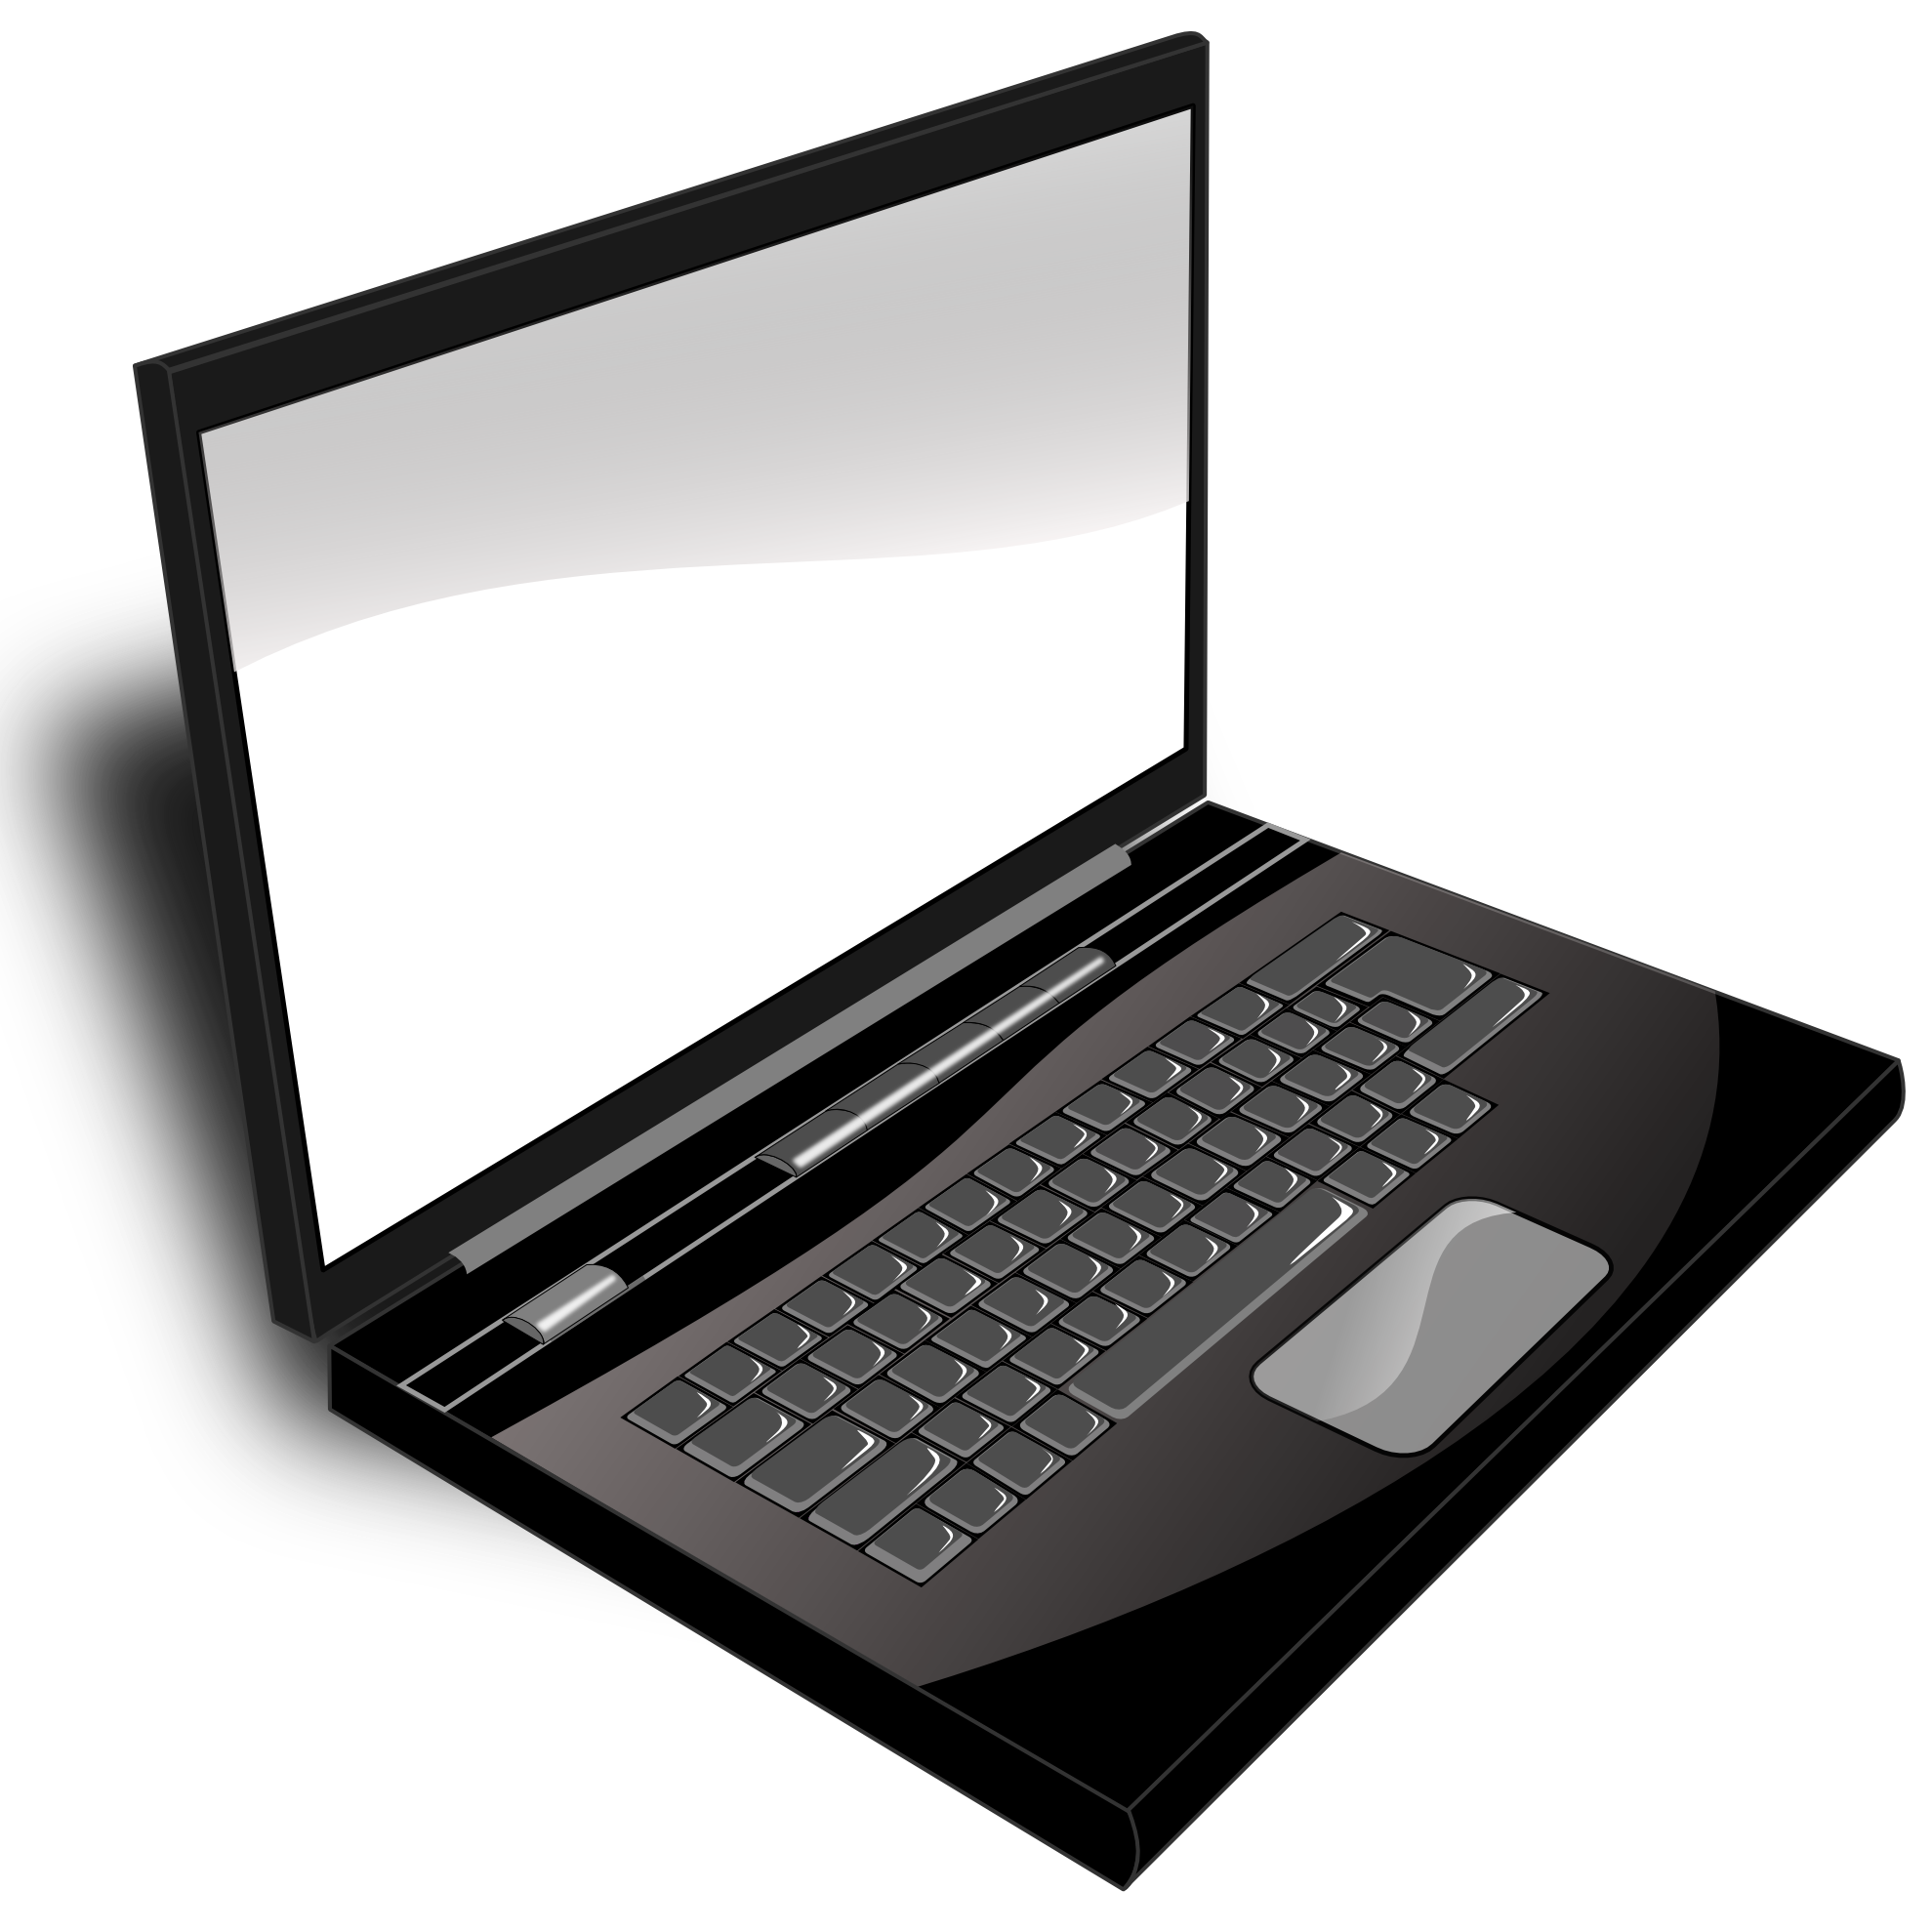 Apple computer clipart black and white